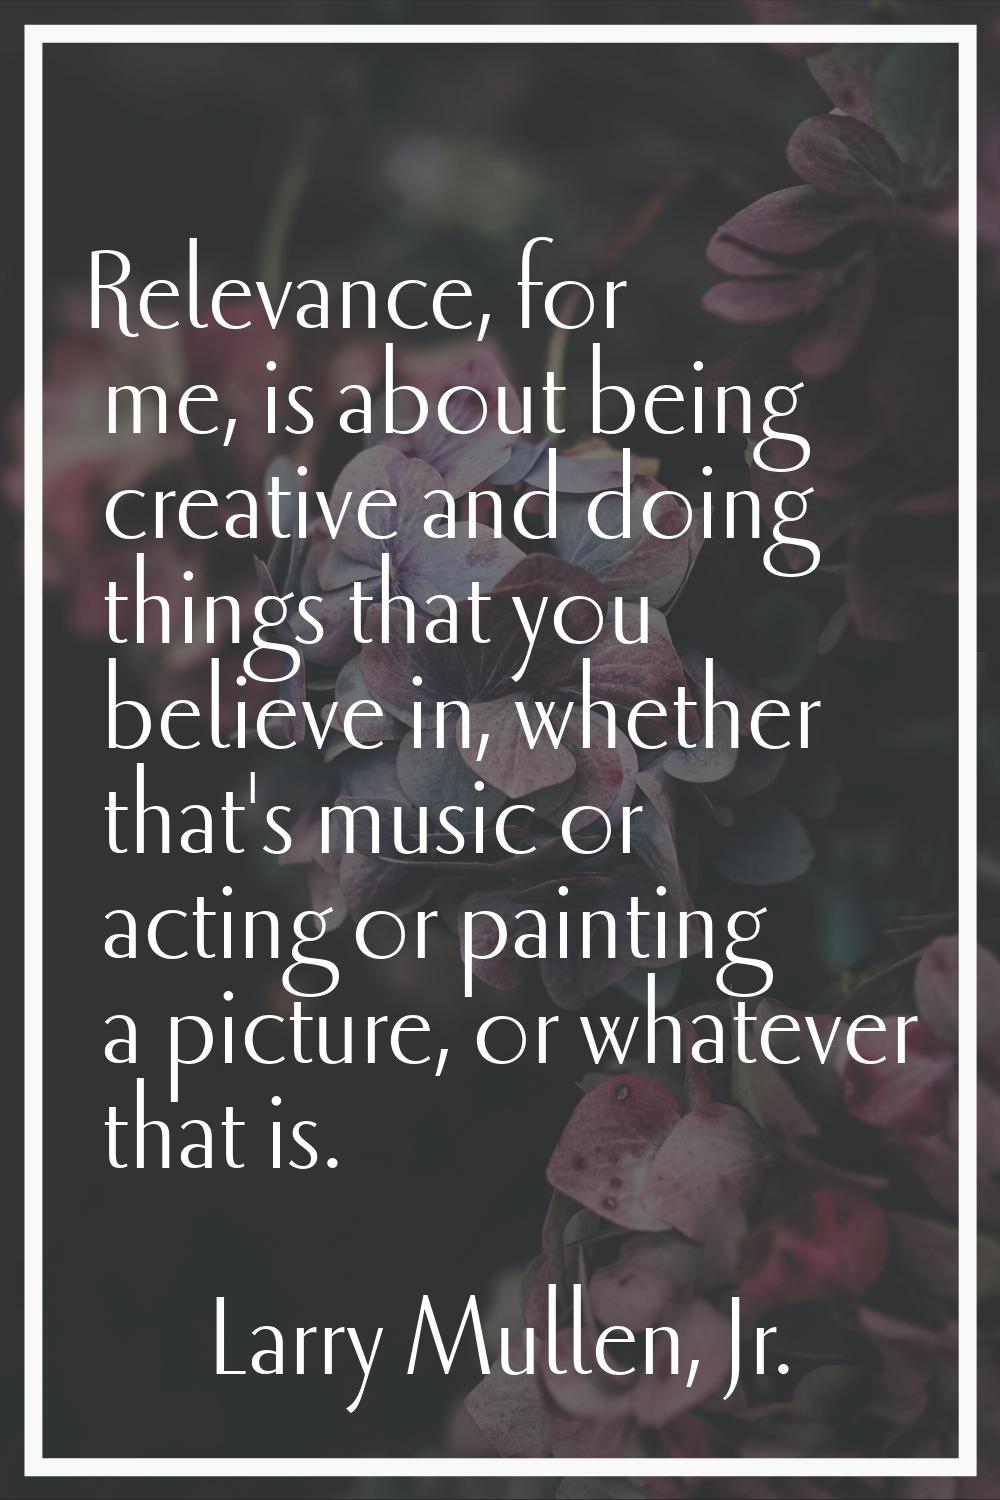 Relevance, for me, is about being creative and doing things that you believe in, whether that's mus